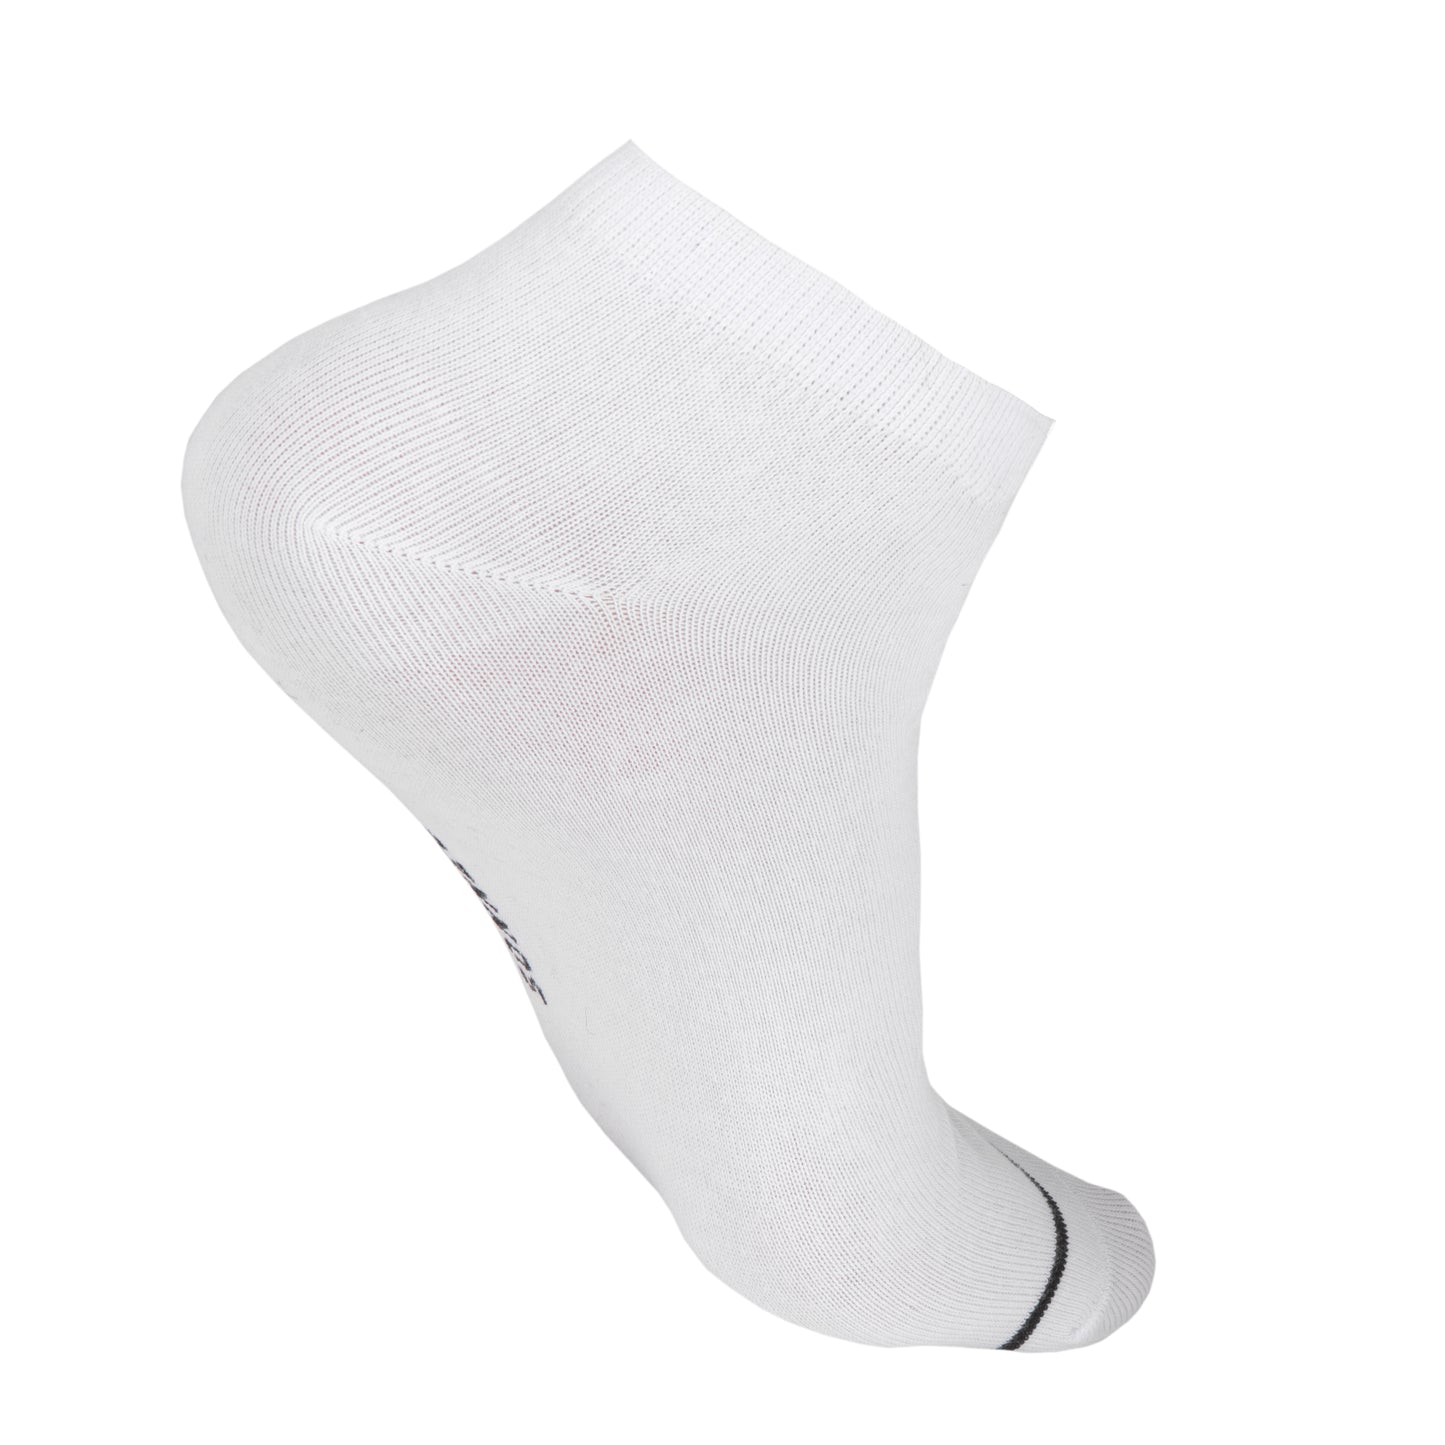 White unisex, fashionable, low cut Socks - pack of 3 or 6 pairs